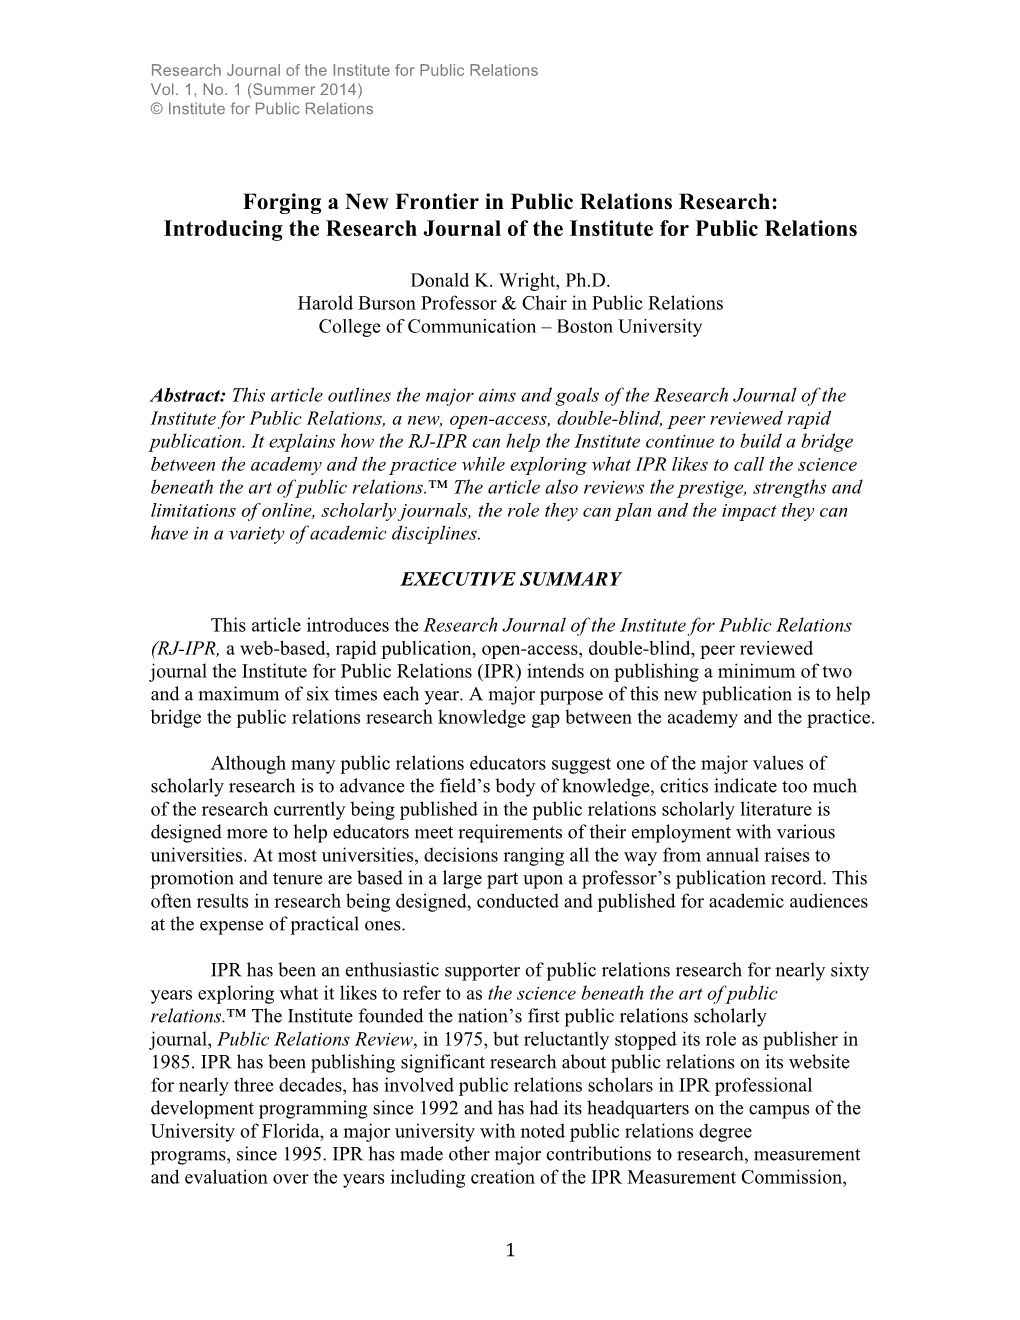 Forging a New Frontier in Public Relations Research: Introducing the Research Journal of the Institute for Public Relations